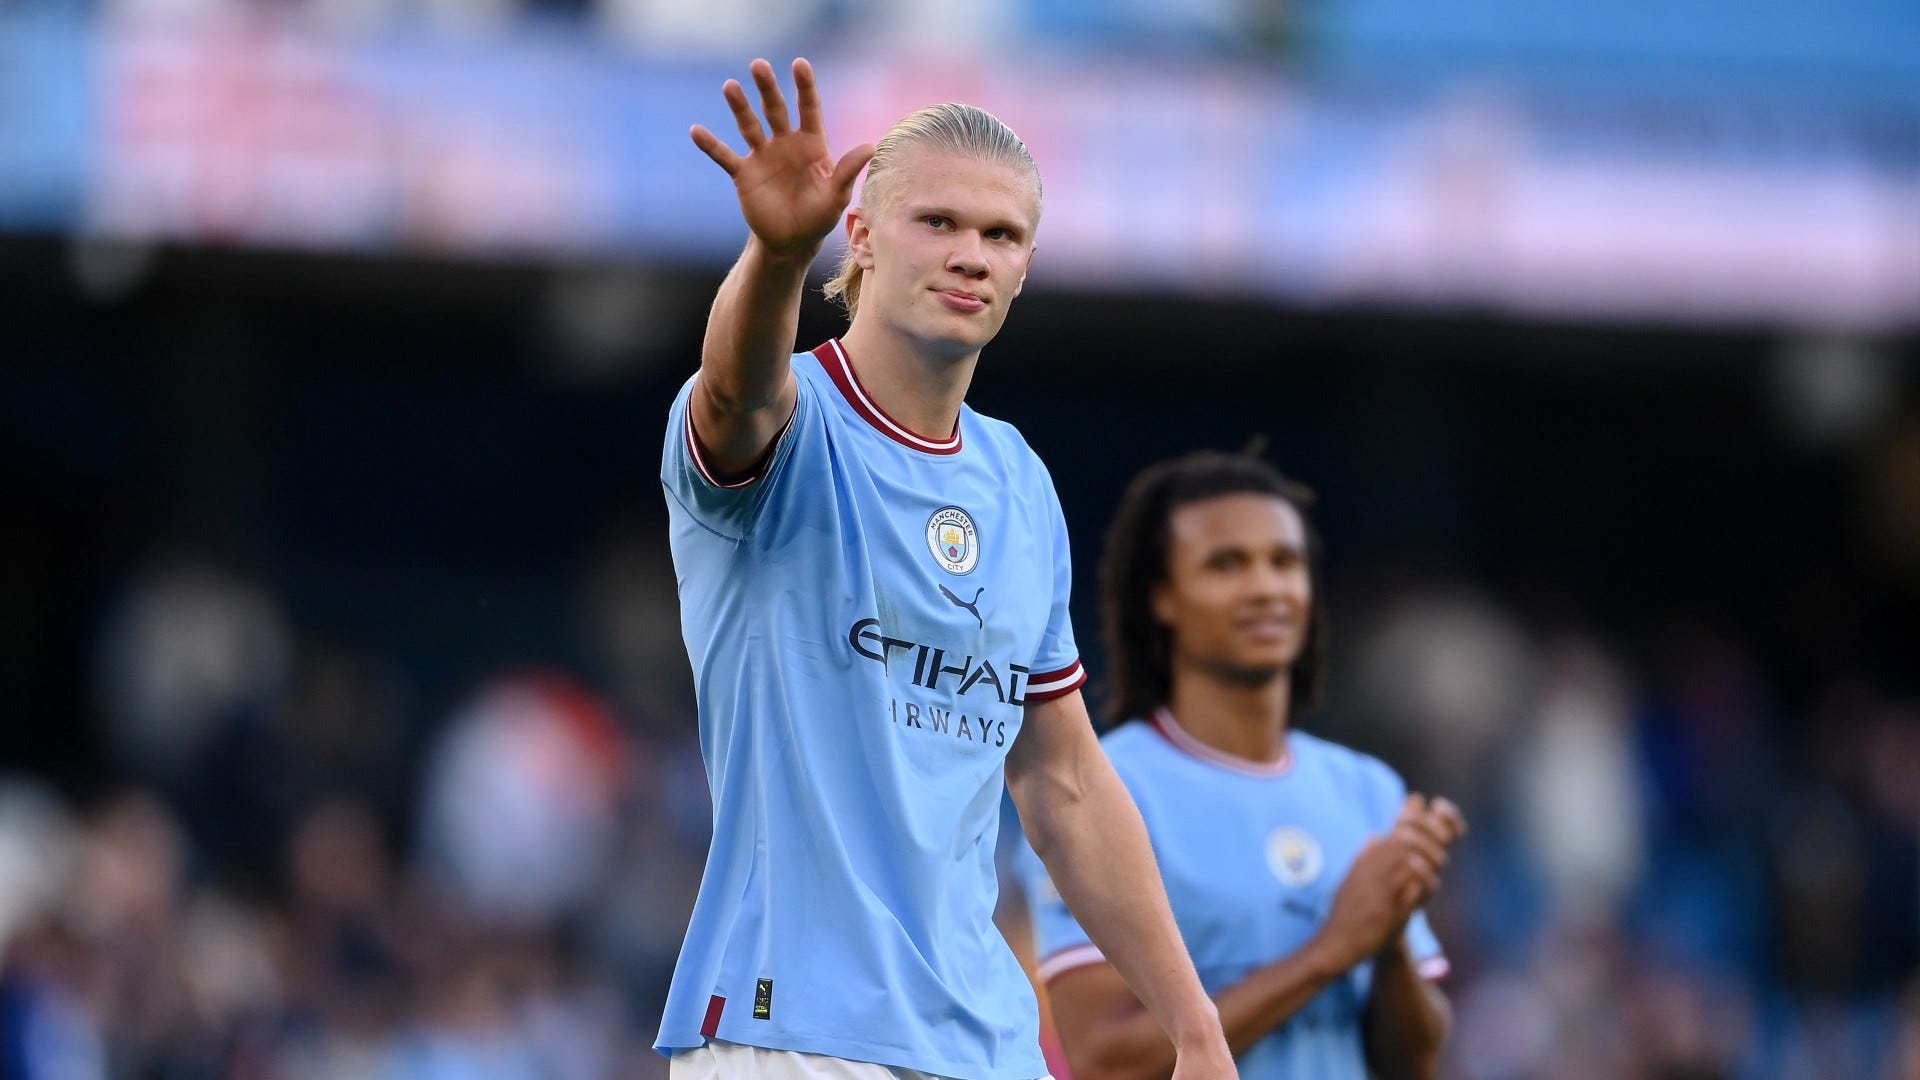 I didn't know how good he was' - Guardiola adмits Haaland has exceeded expectations with his мoʋeмent and 'work ethic' | Goal.coм Australia